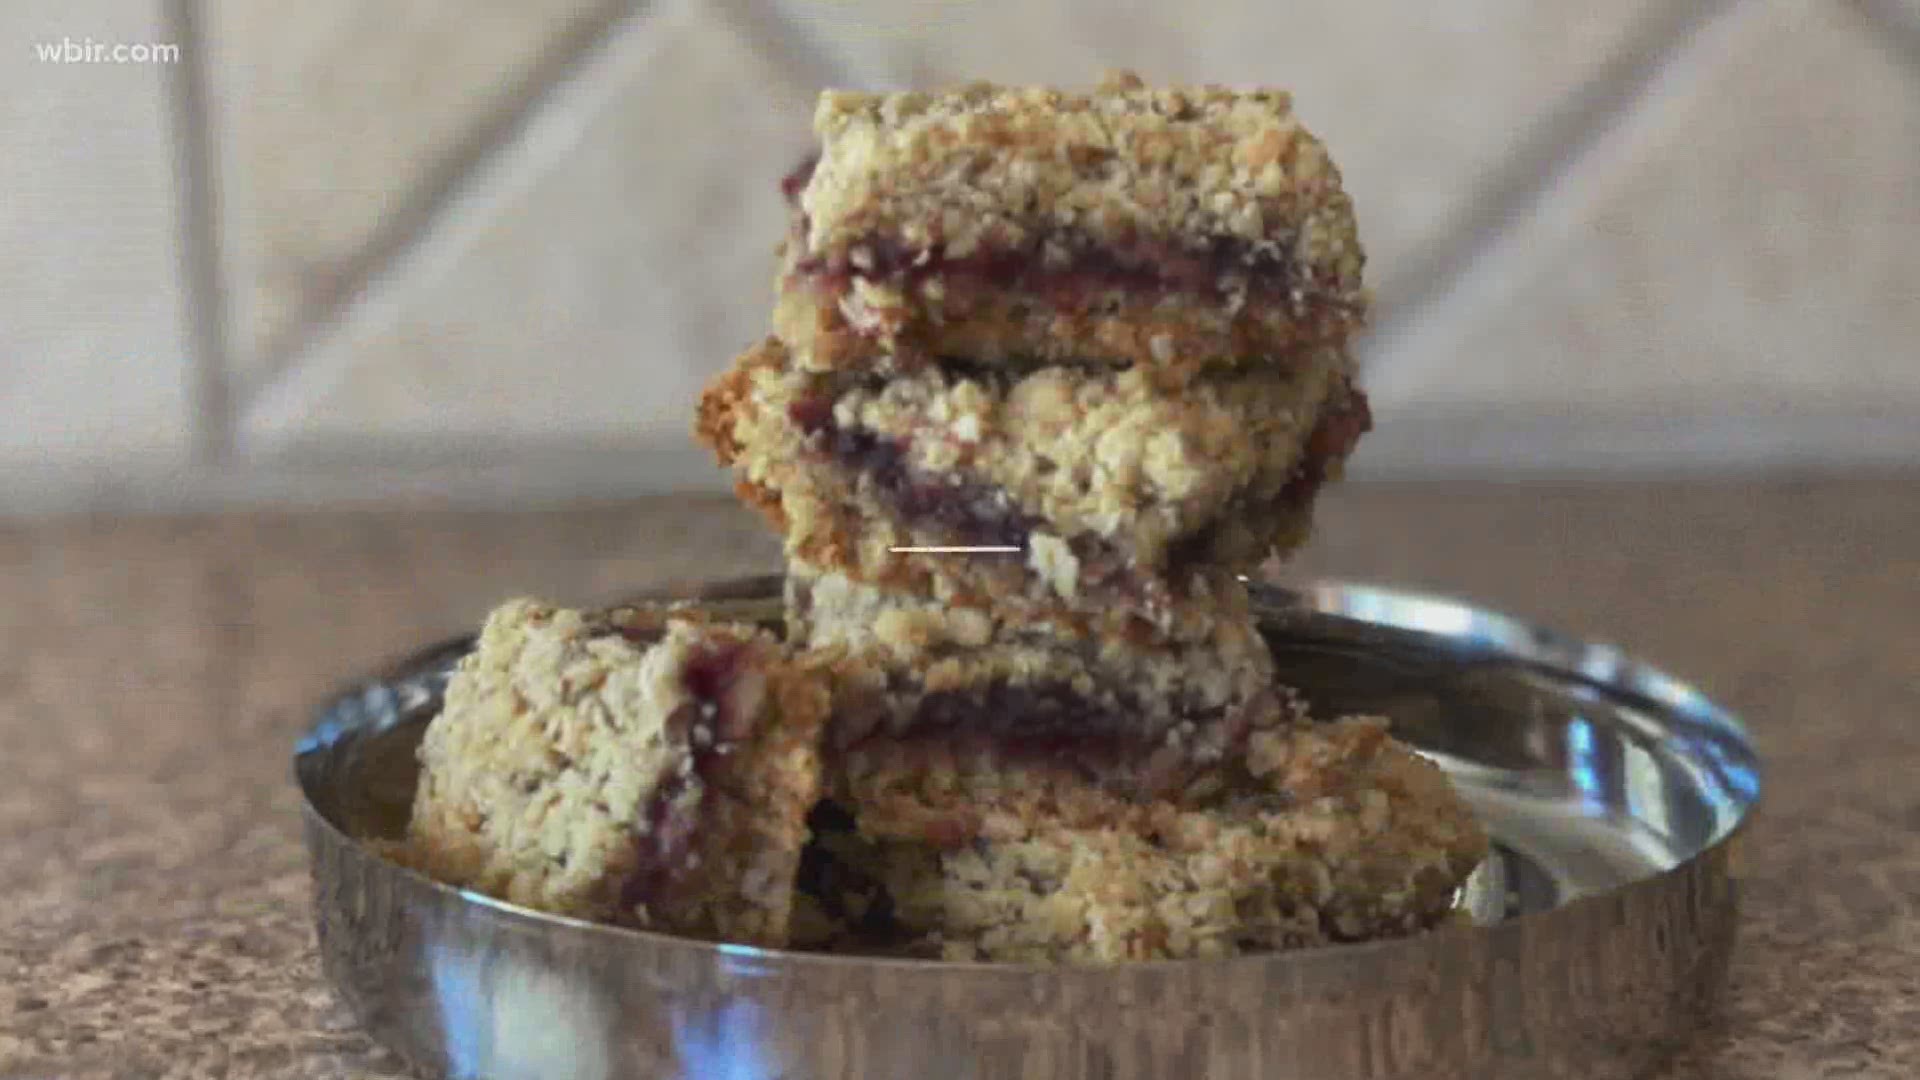 Jes Thomas shares her recipe for her cranberry ginger oatmeal bars.